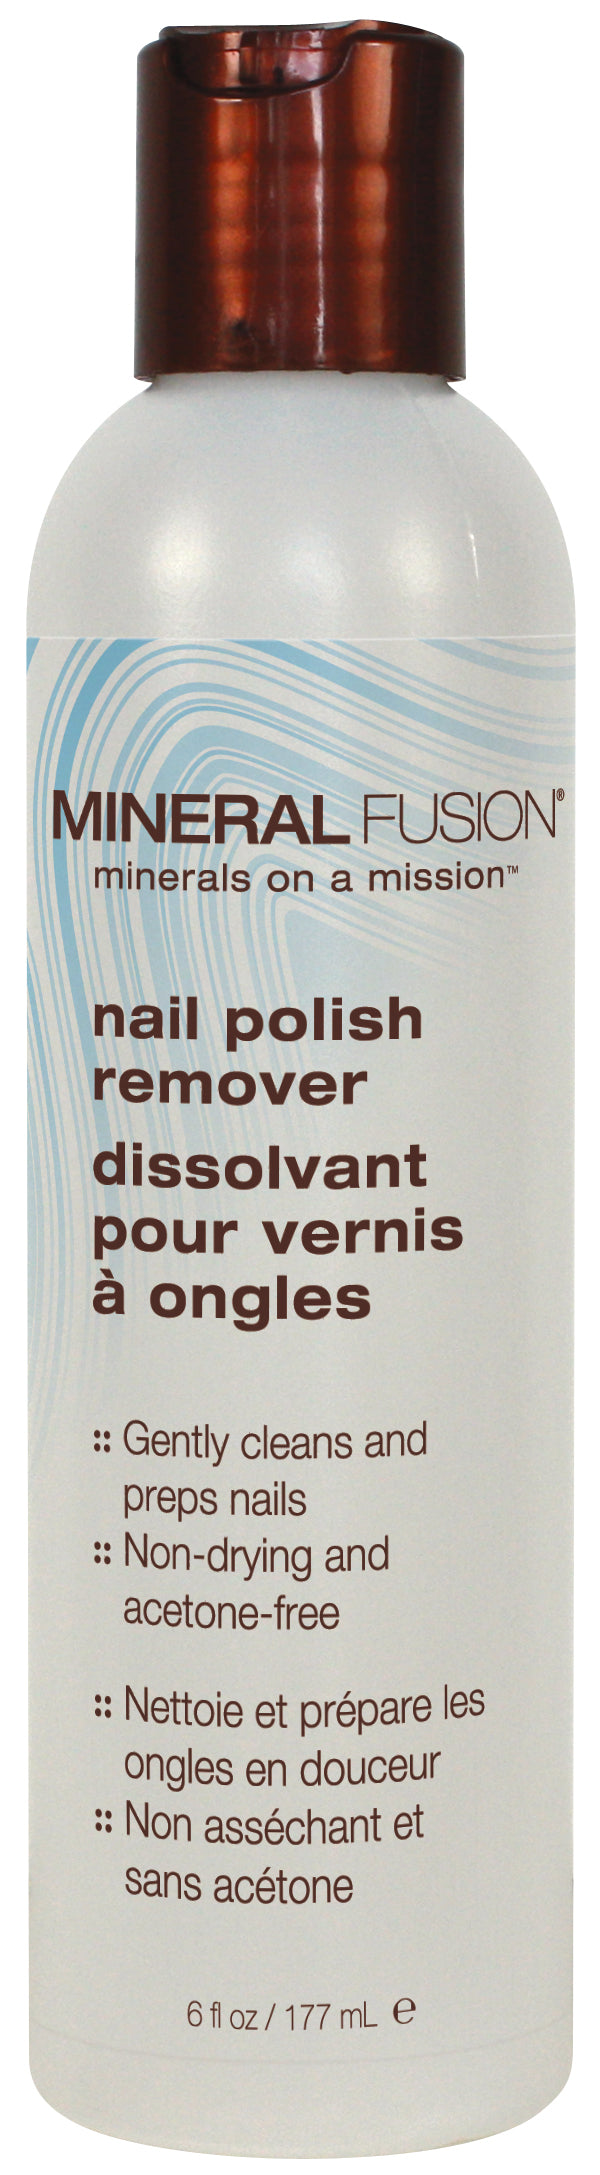 Mineral Fusion Nail Pol ish Remover, 6 Ounce (Pack of 2) - Walmart.com